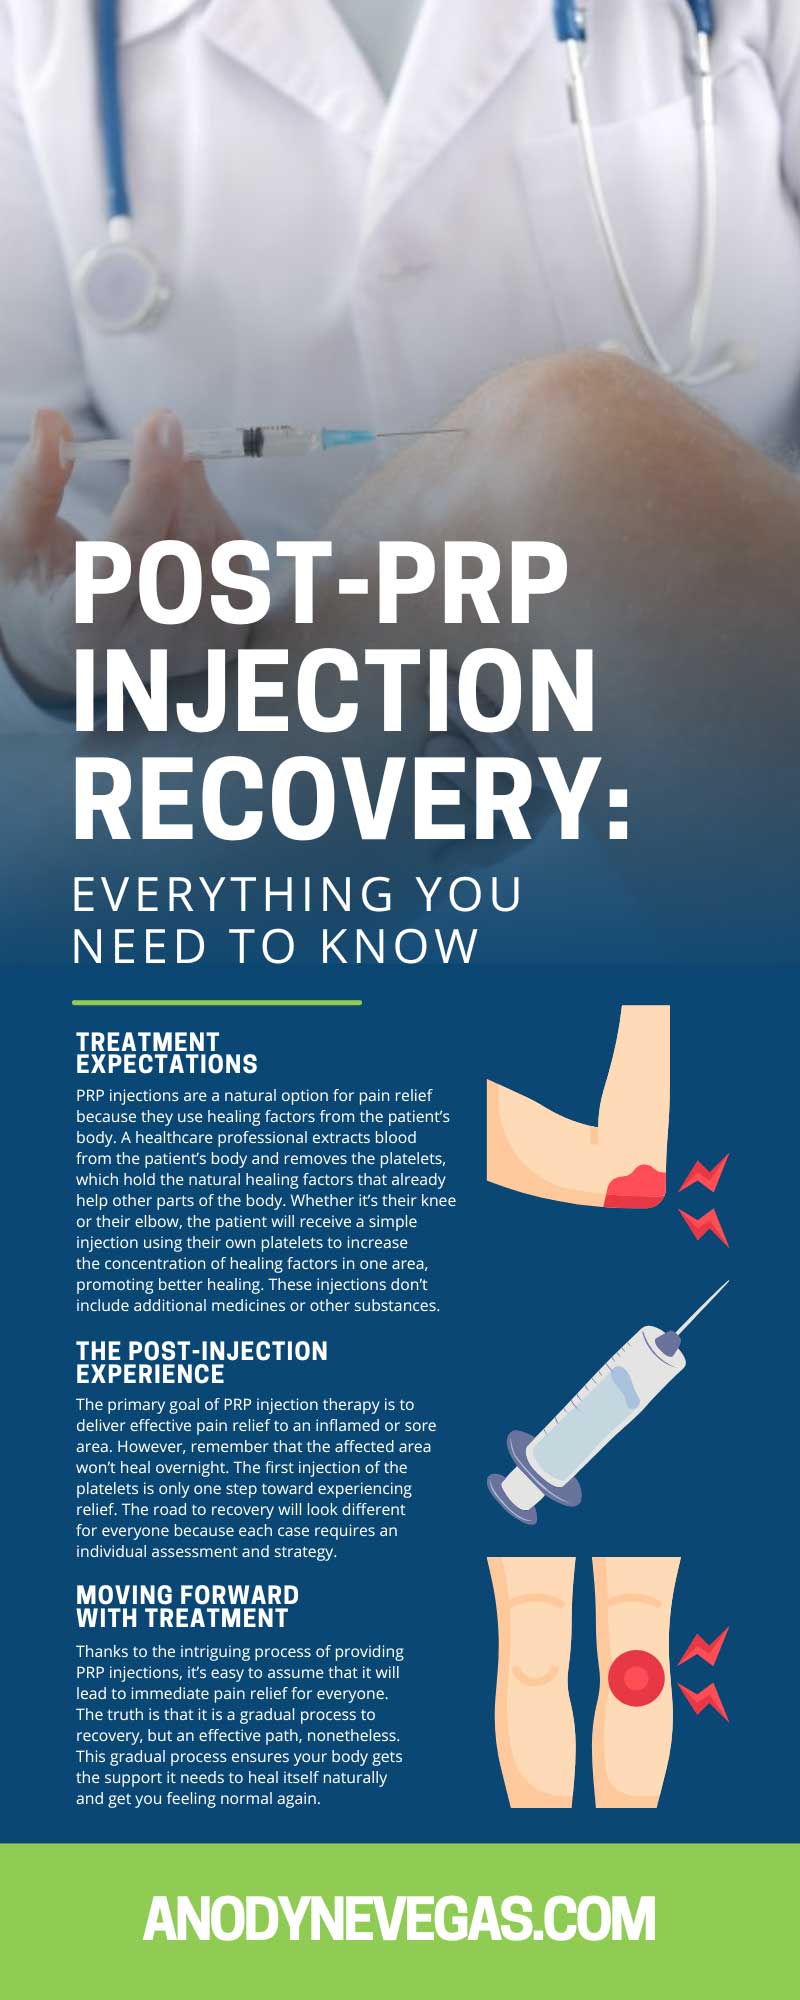 Post-PRP Injection Recovery: Everything You Need To Know